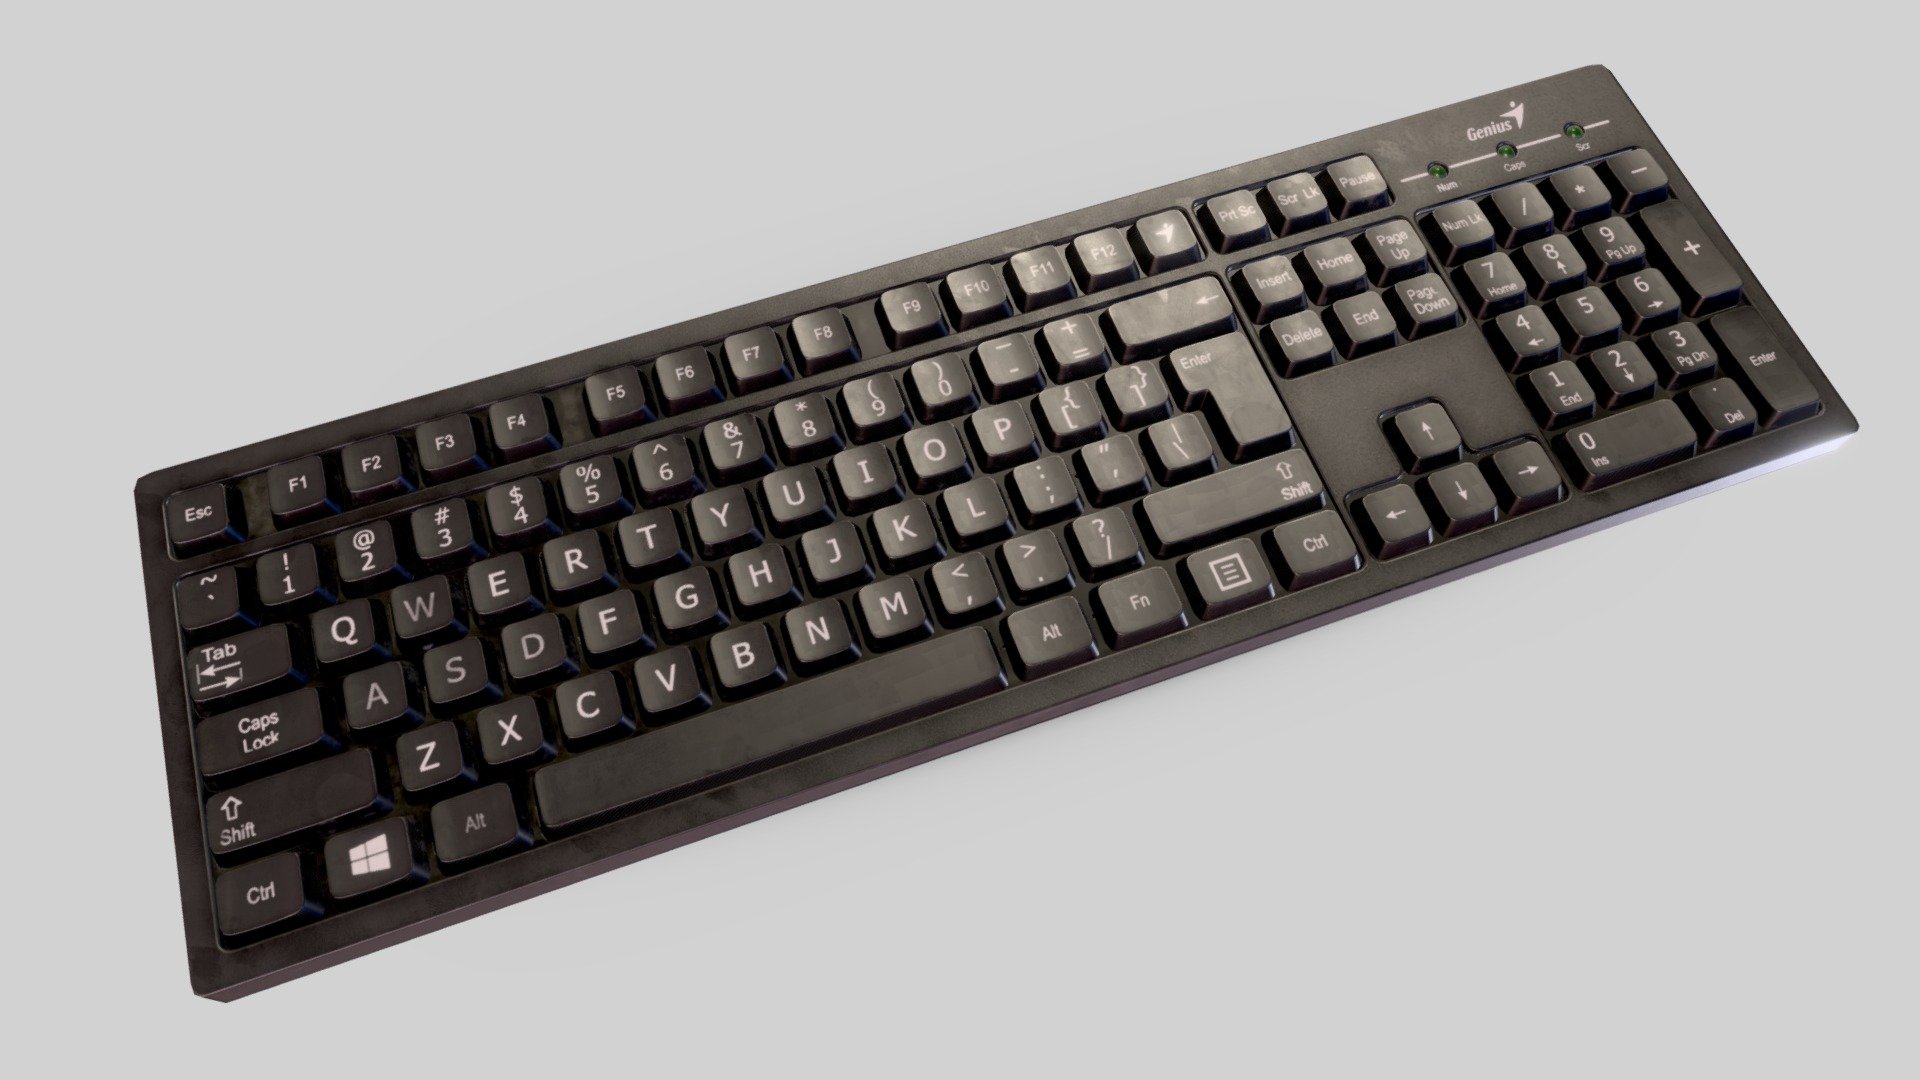 Keyboard 3D model with PBR maps 4096x4096 such as: • BaseColor • Metallic • Roughness • Ambient Occlusion • NormalDirectX •
Model in real scale (meters) - Keyboard Low-poly 3D model - Buy Royalty Free 3D model by Andrew.Maria 3d model